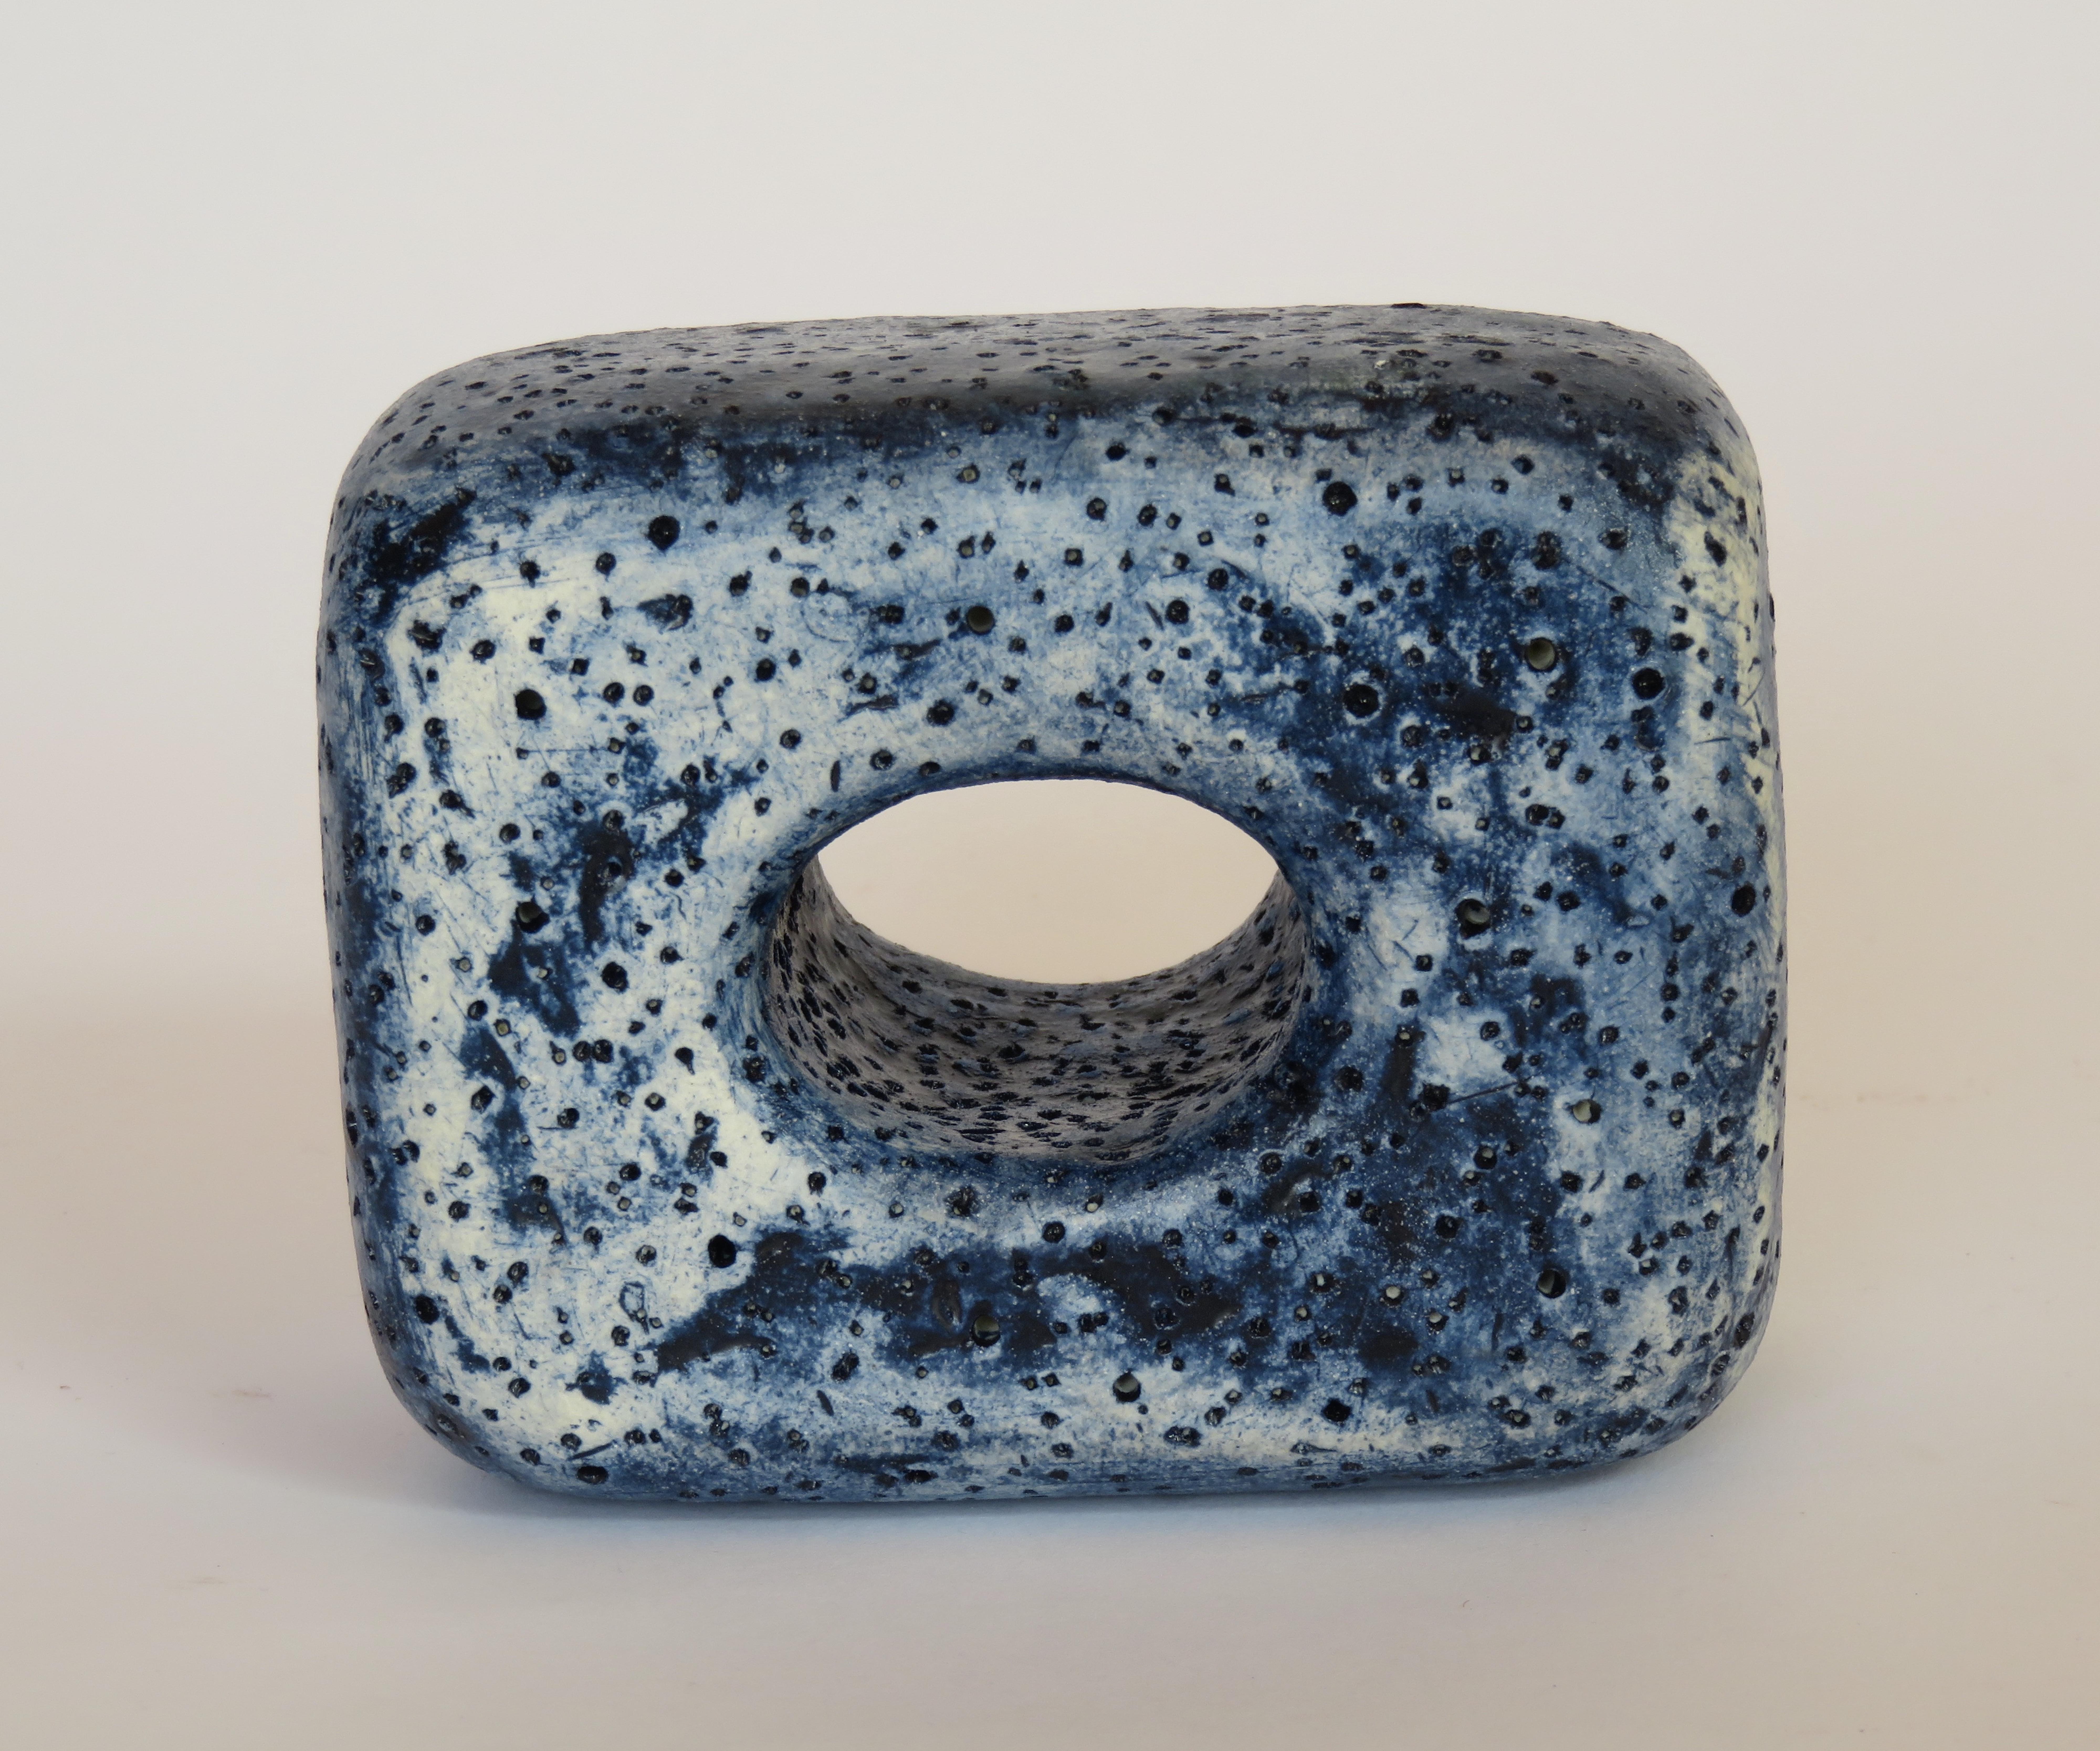 Contemporary Hand Textured Ceramic Sculpture, Oblong Cube with Oval Opening in Deep Blue Wash